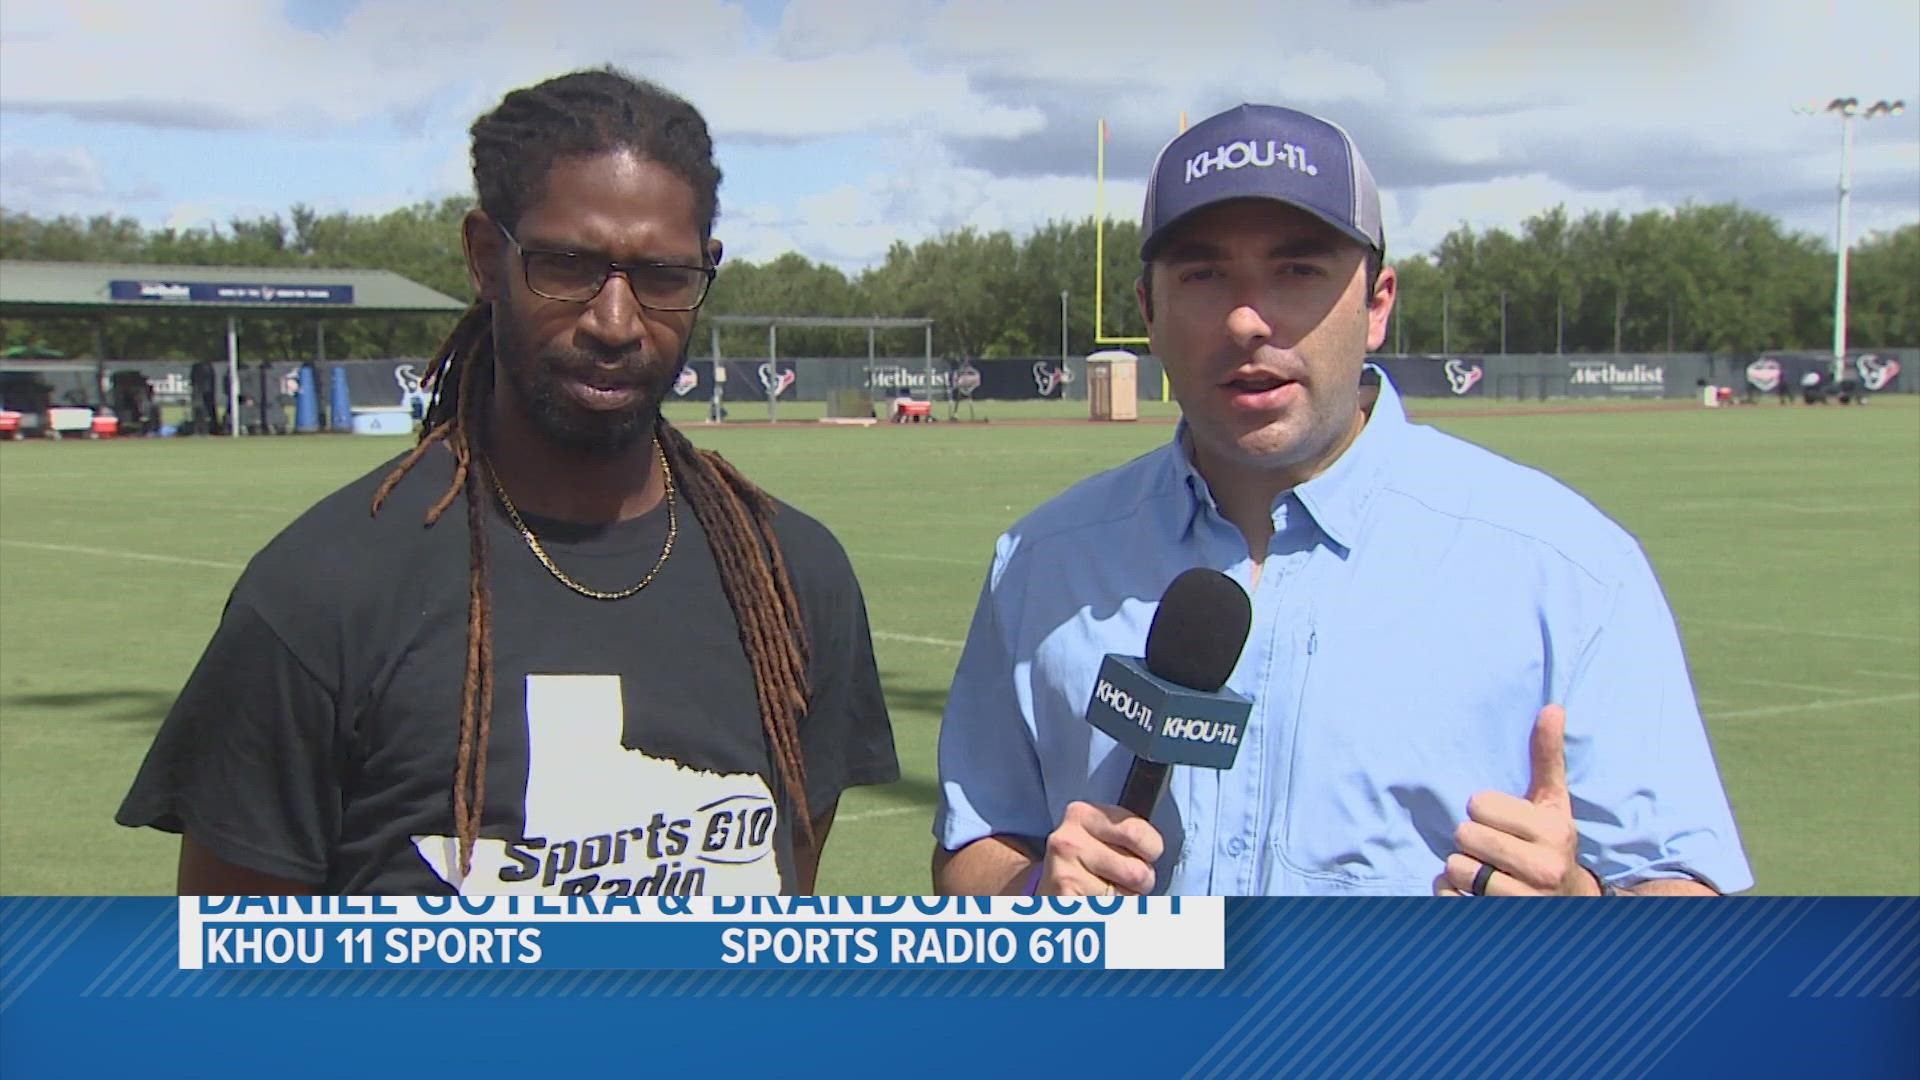 KHOU 11's Daniel Gotera is joined by SportsRadio 610's Brandon Scott to break down the third day of training camp.